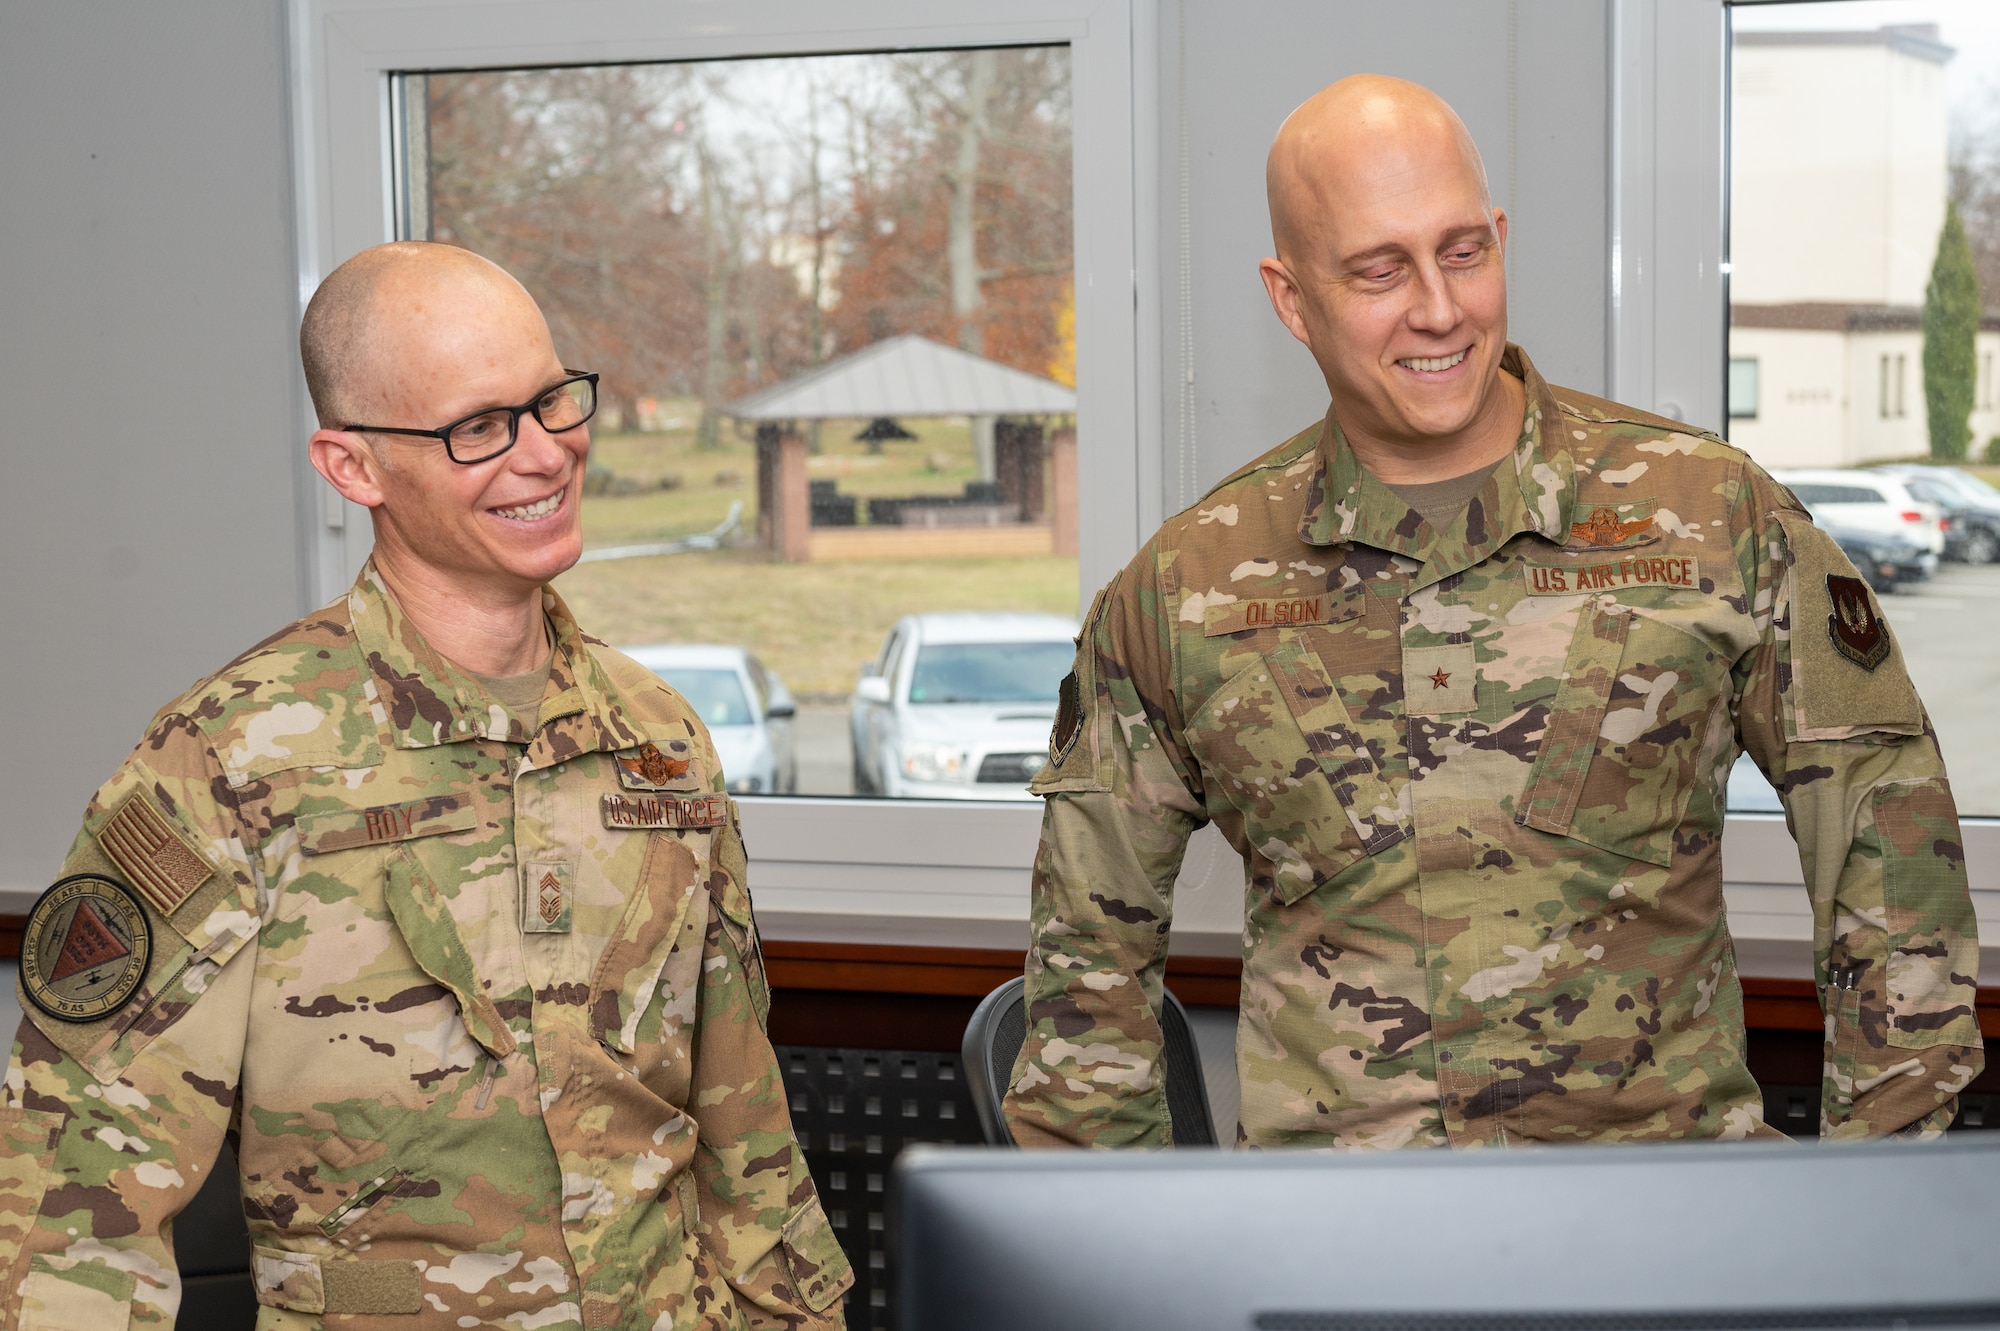 Two military members standing in an office.